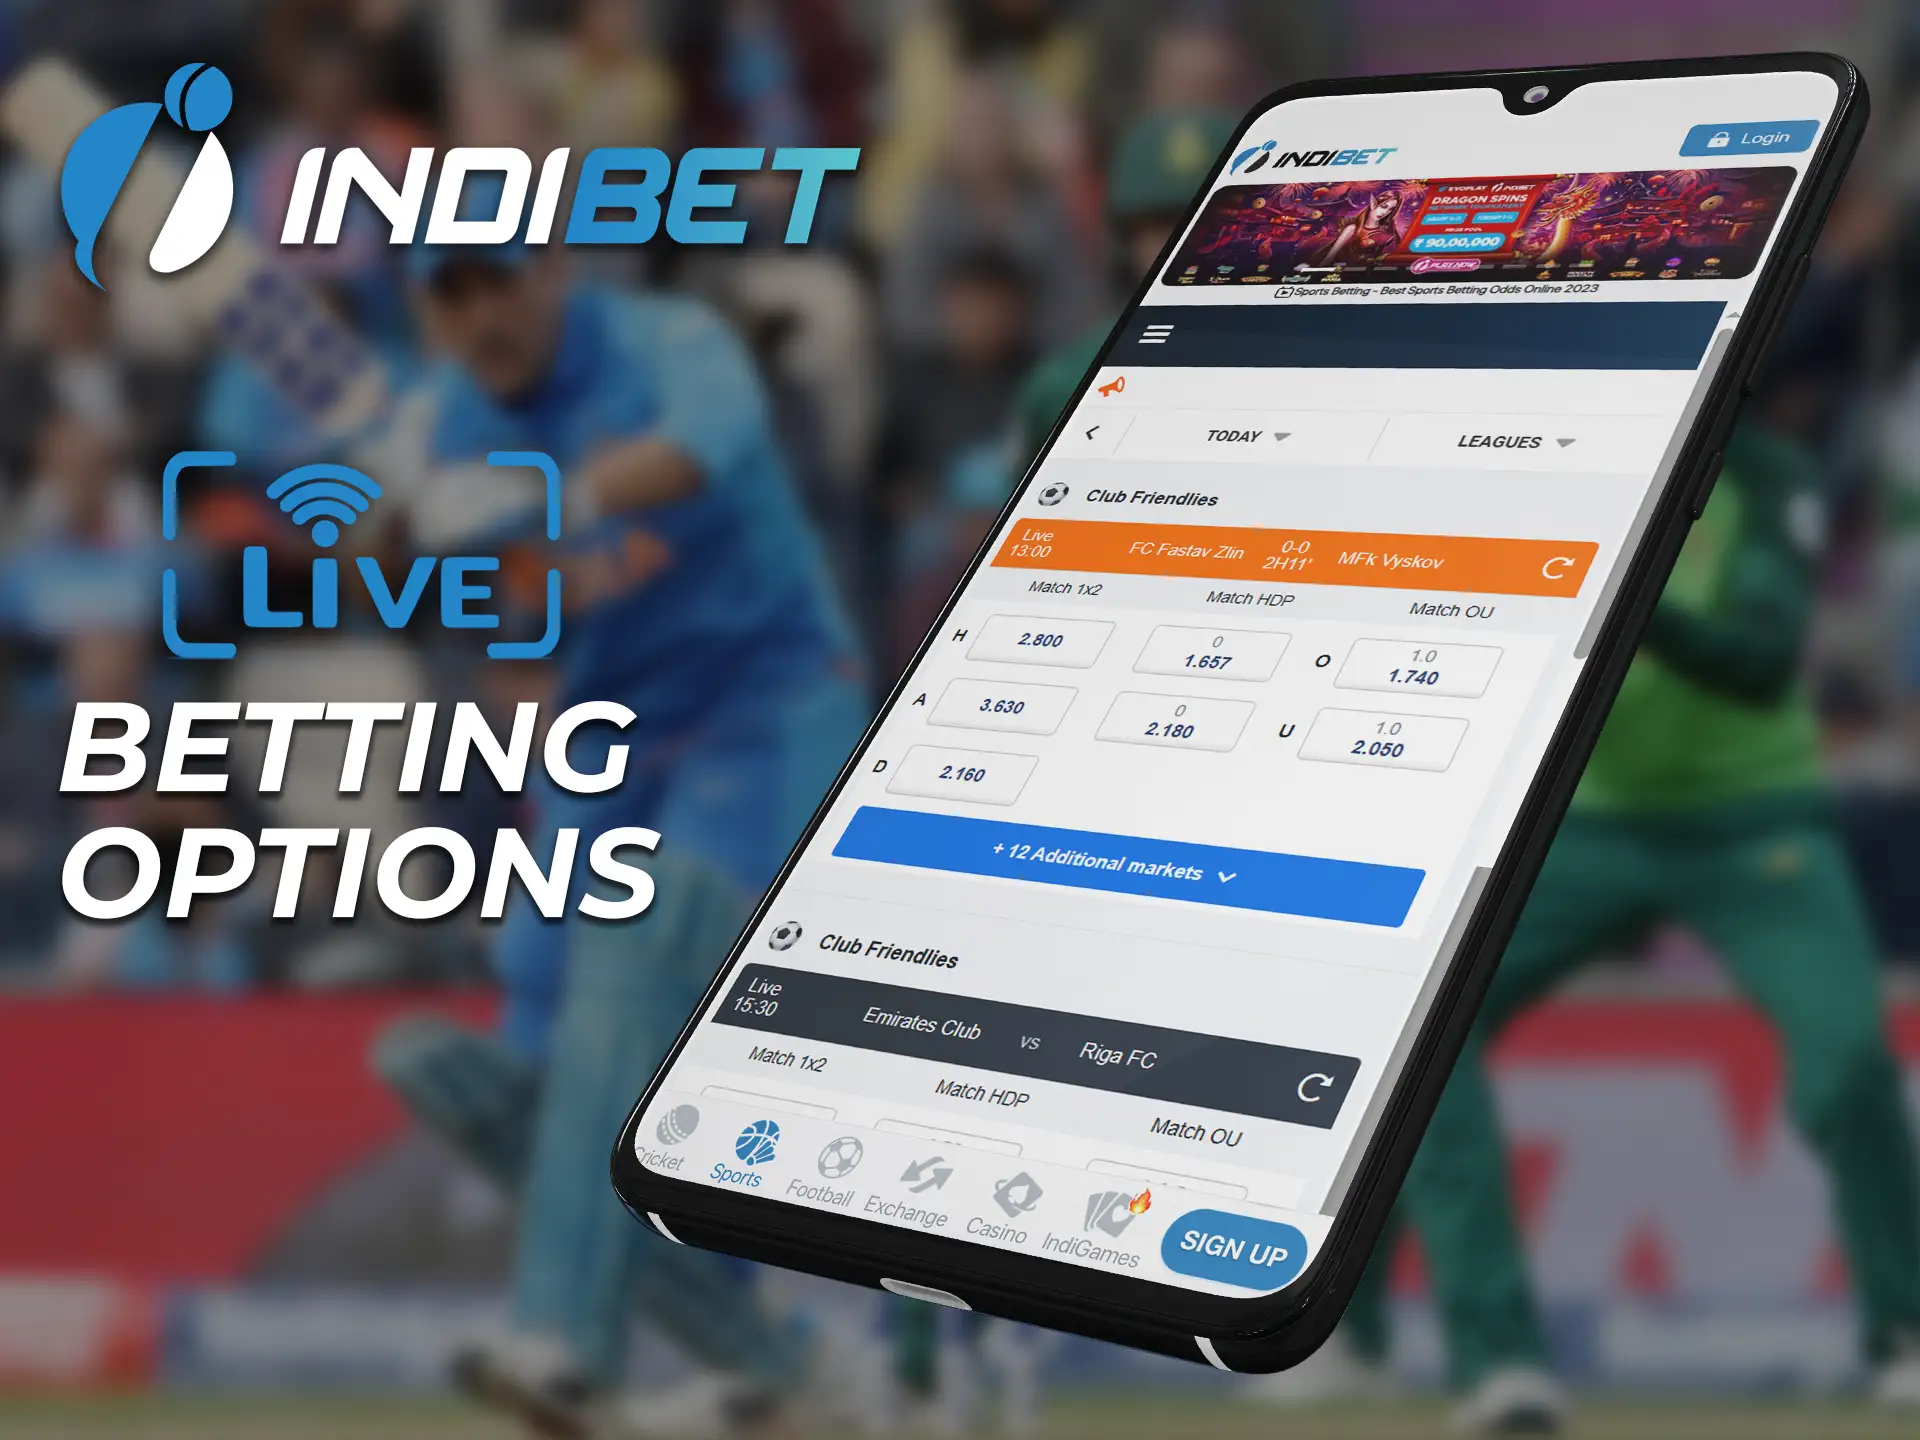 The Indibet app has several sports betting options.